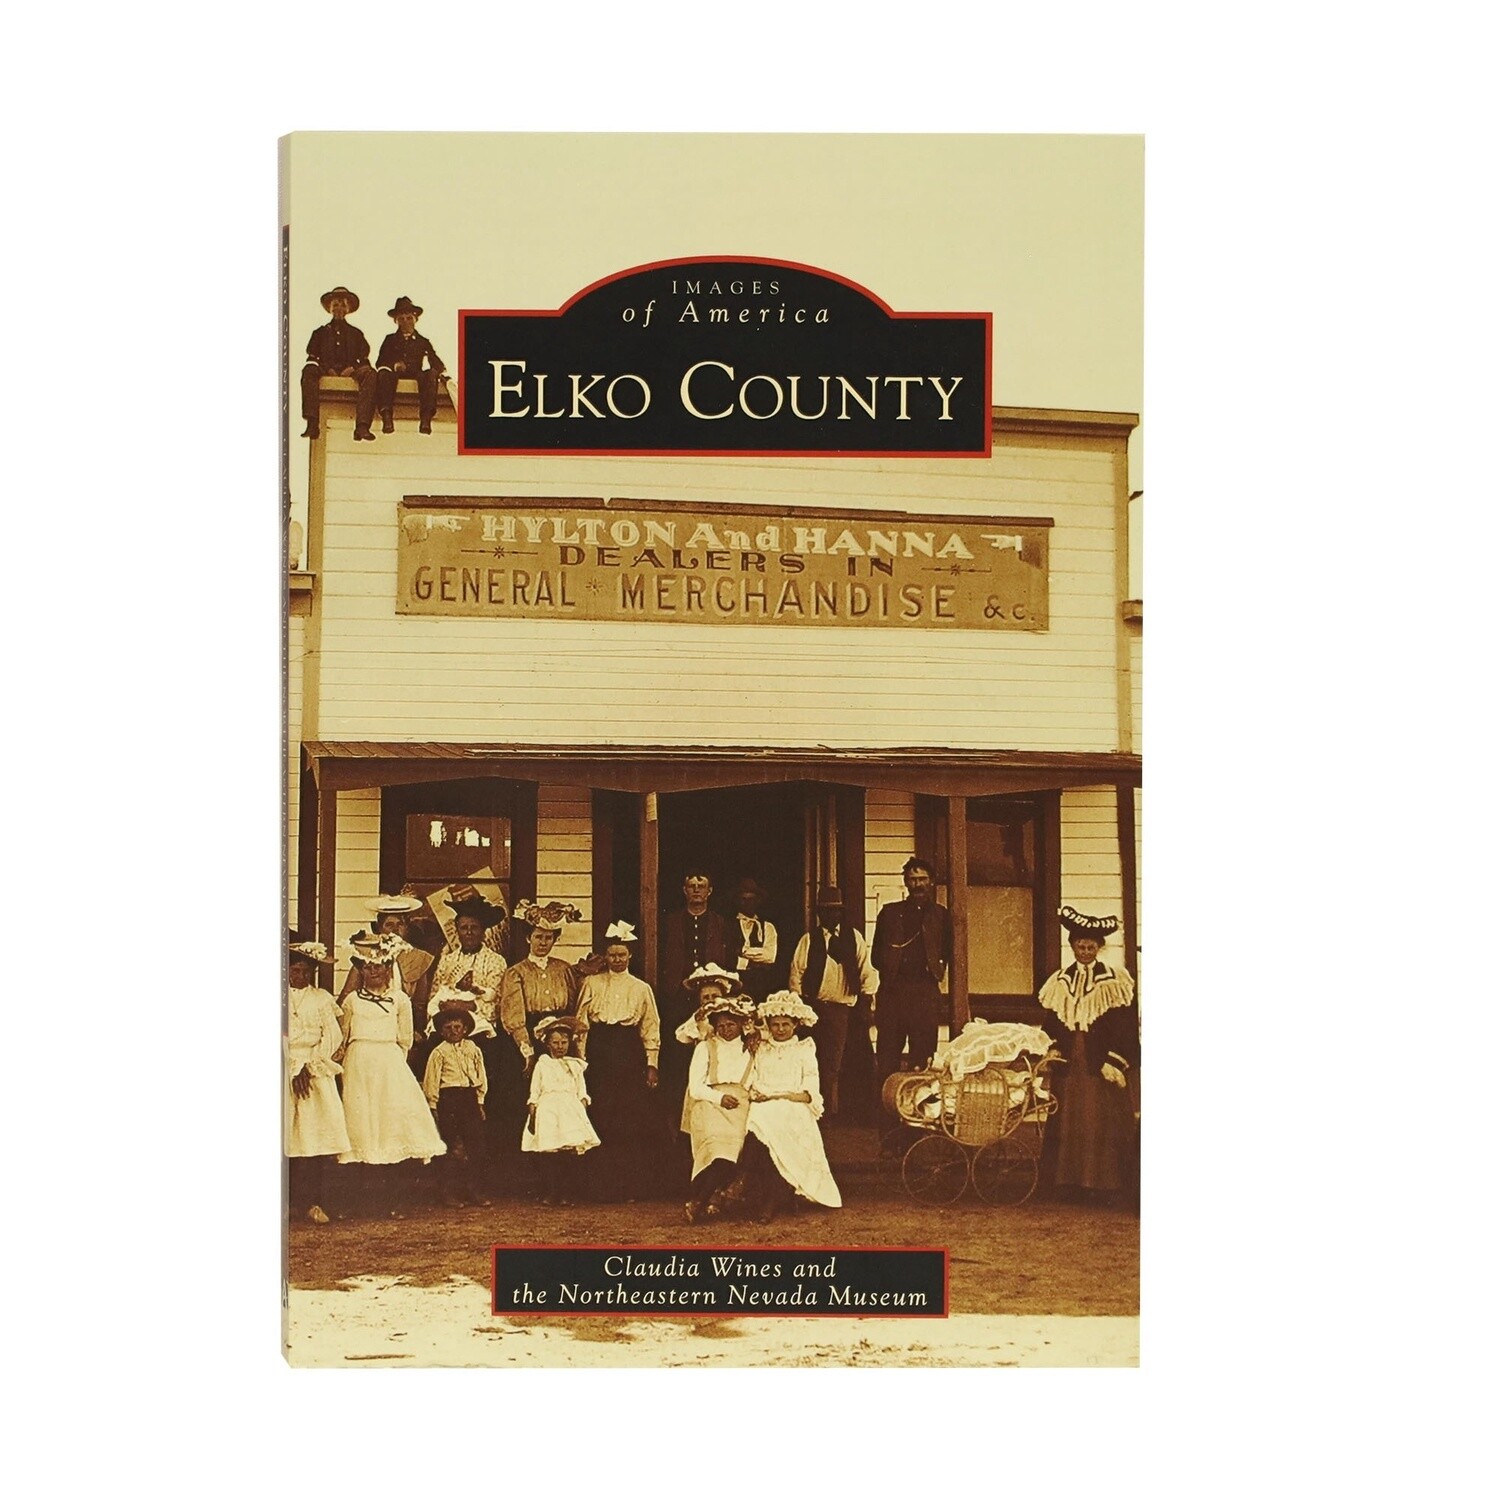 Images of America: Elko County by Claudia Wines and the Northeastern Nevada Museum